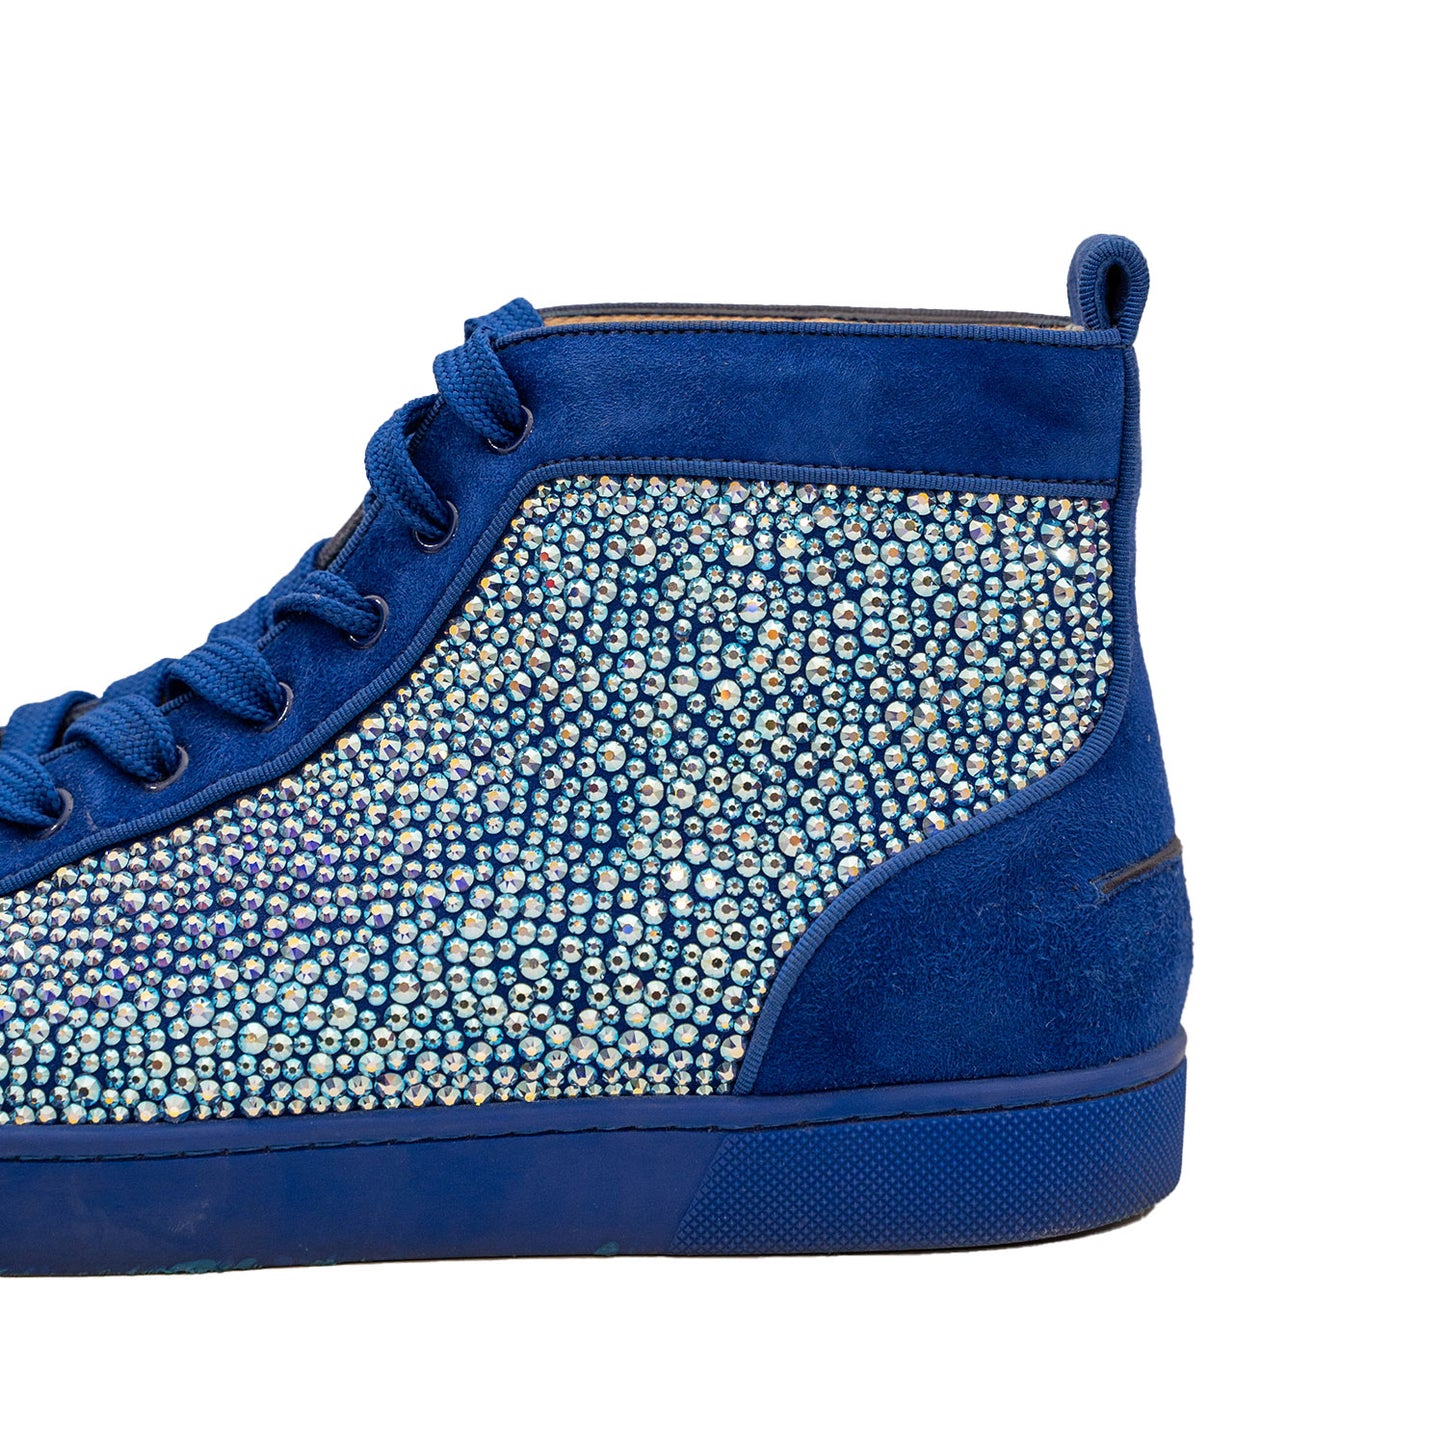 Christain Louboutin Swarovski Crystal Blue Bedazzled Suede Mid-Top Sneaker